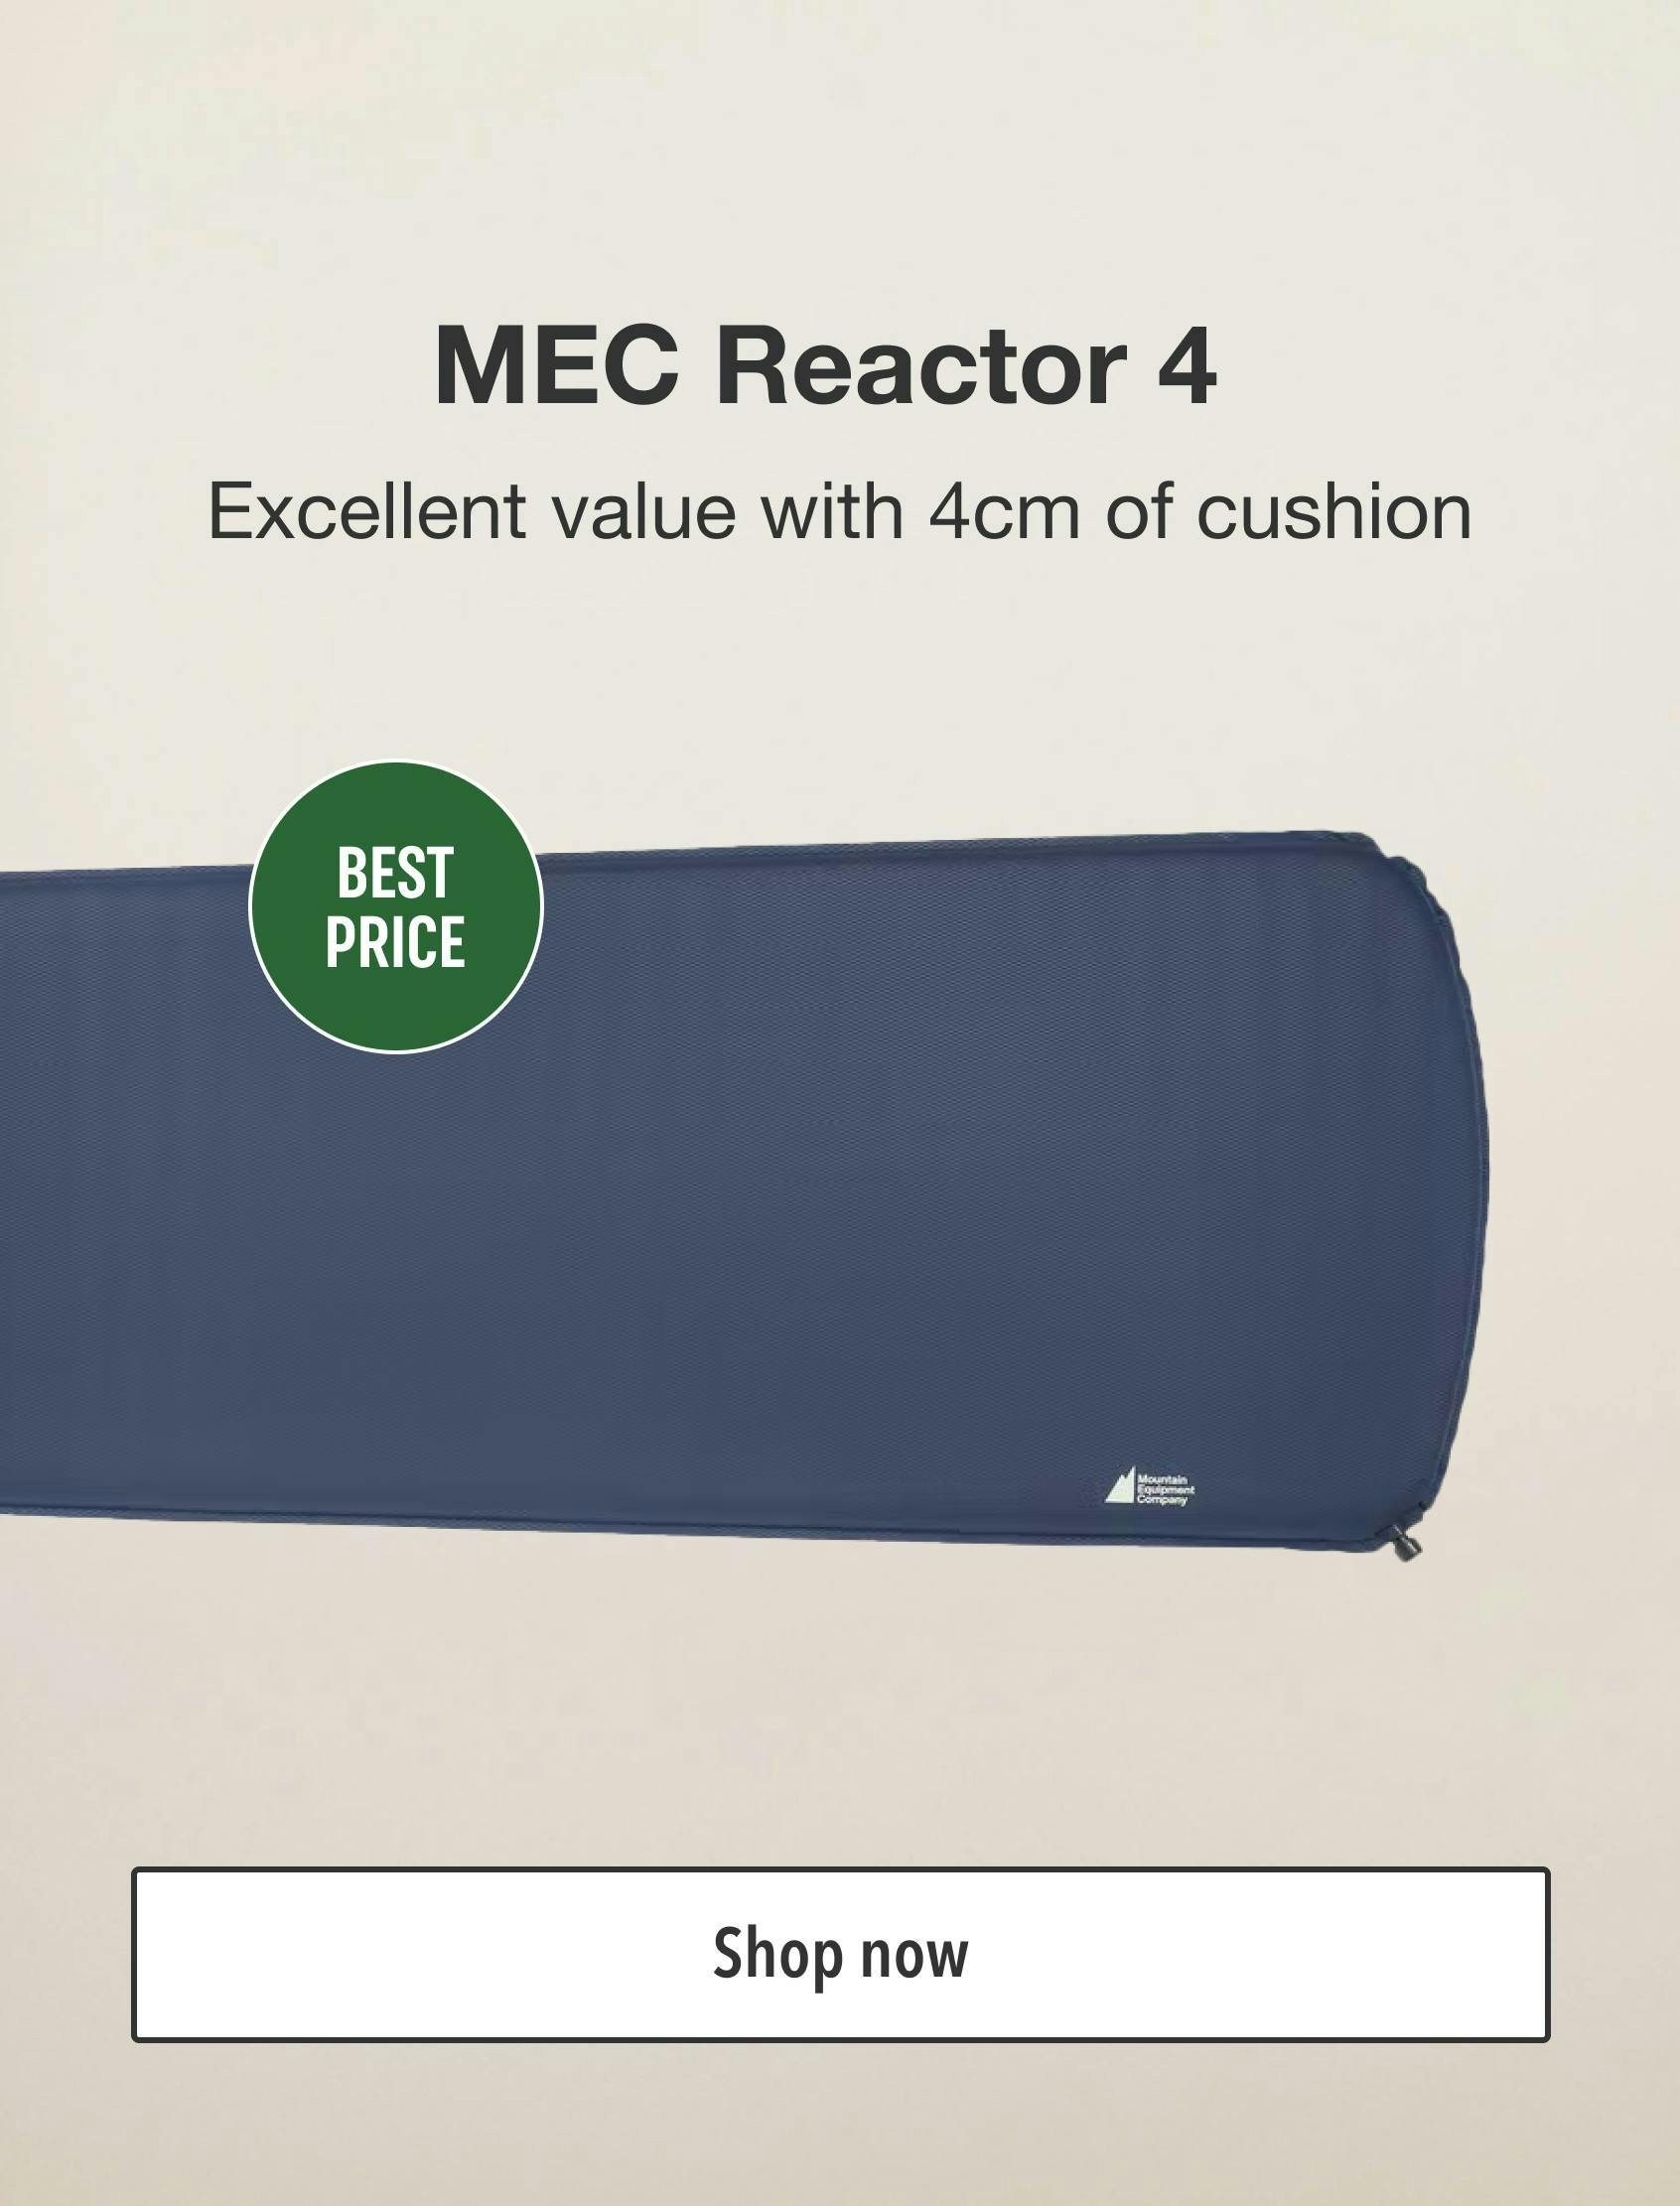 MEC Reactor 4. Excellent value with 4cm of cushion